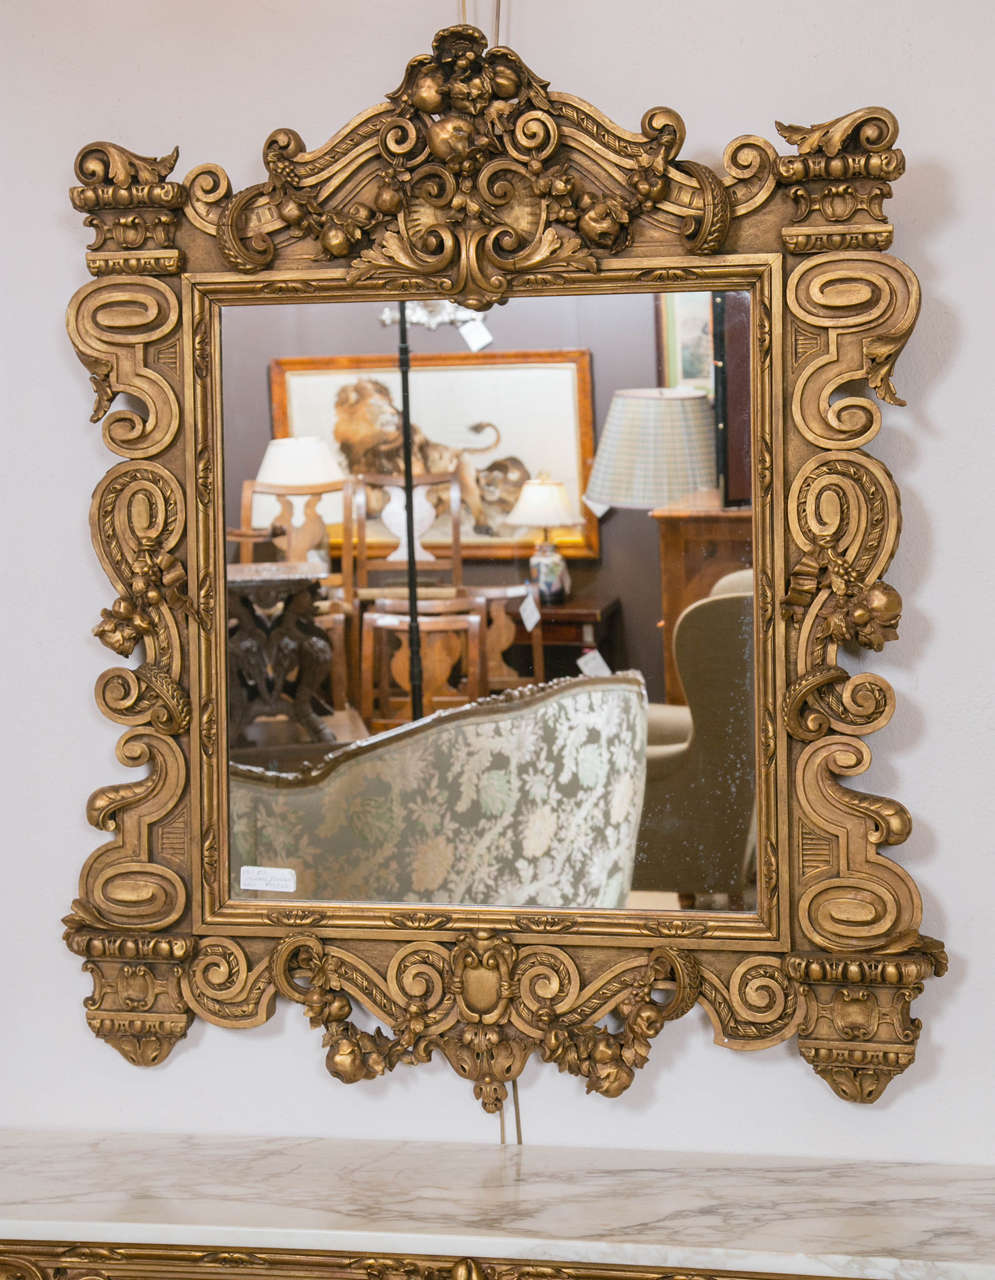 Finely carved and gilt decorated wall or console mirror this made in France Mirror is done in the Louis XVI Fashion having carvings of fruit and the like with scrolls decorating the whole. 
joy.

     